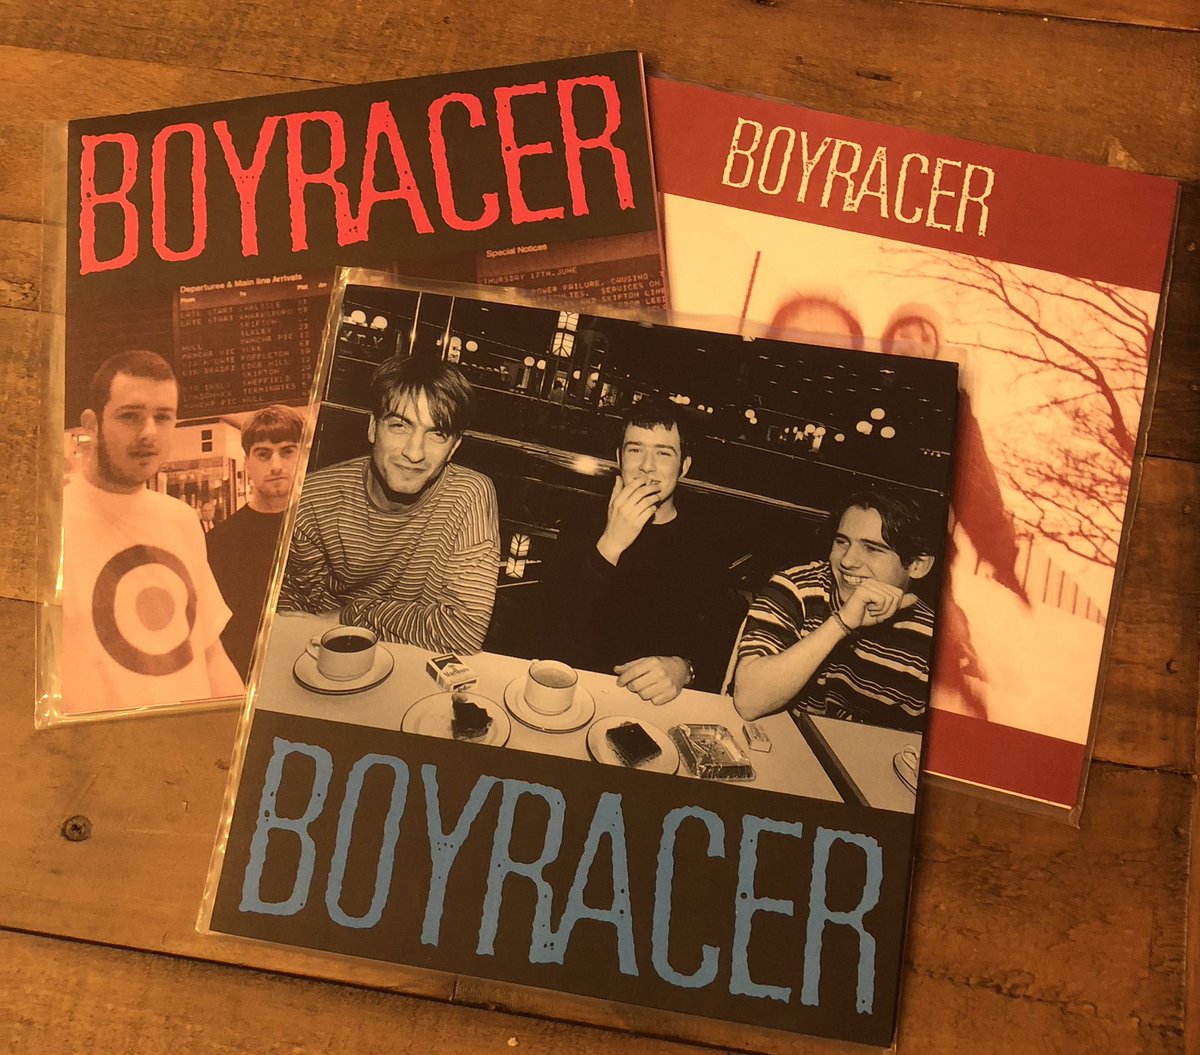 @durutti74 I’ll throw Boyracer into the mix. Already a fan and snapping up every track I could find, for them to join Sarah Records that I was also a huge fan of was just amazing! The B Is For Boyracer 7” is probably the most played Sarah 7” I have! Pure Punk Perfection #Top20SarahRecords